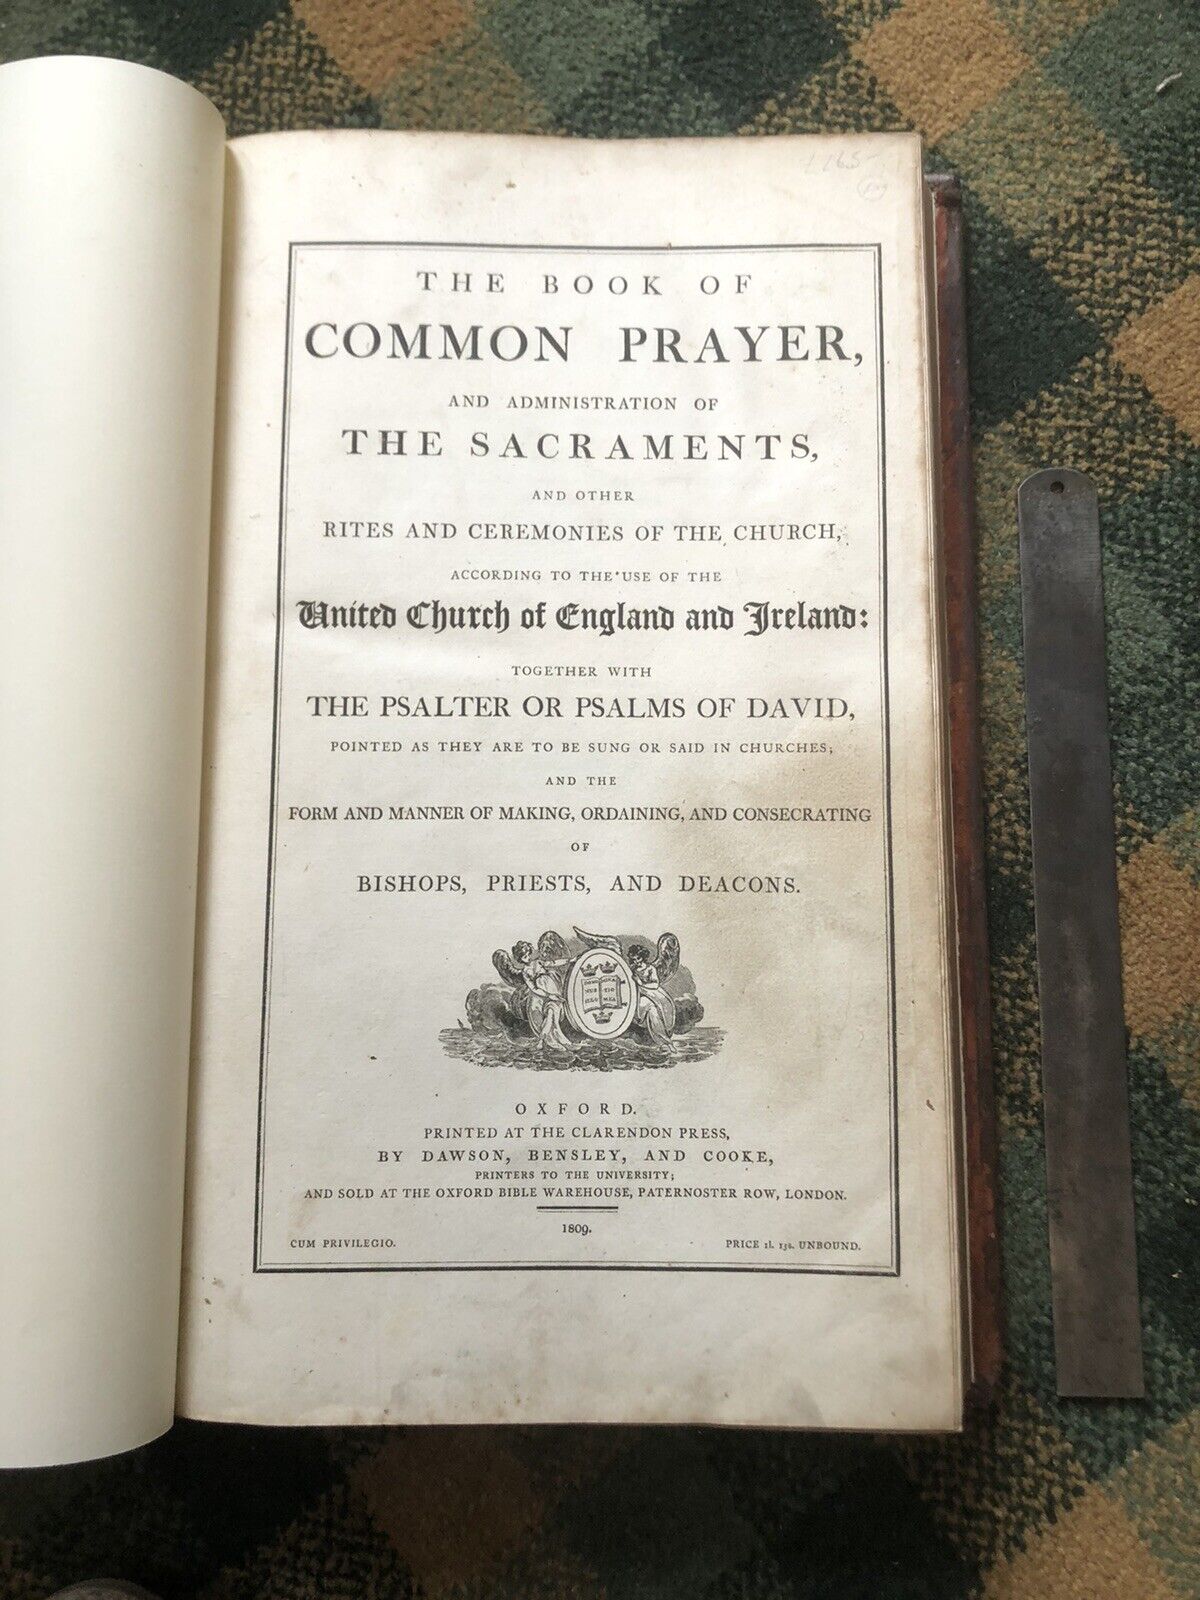 1809 Large Early 19thc Common Prayer : Antique Folio Leather Binding ( Oxford )